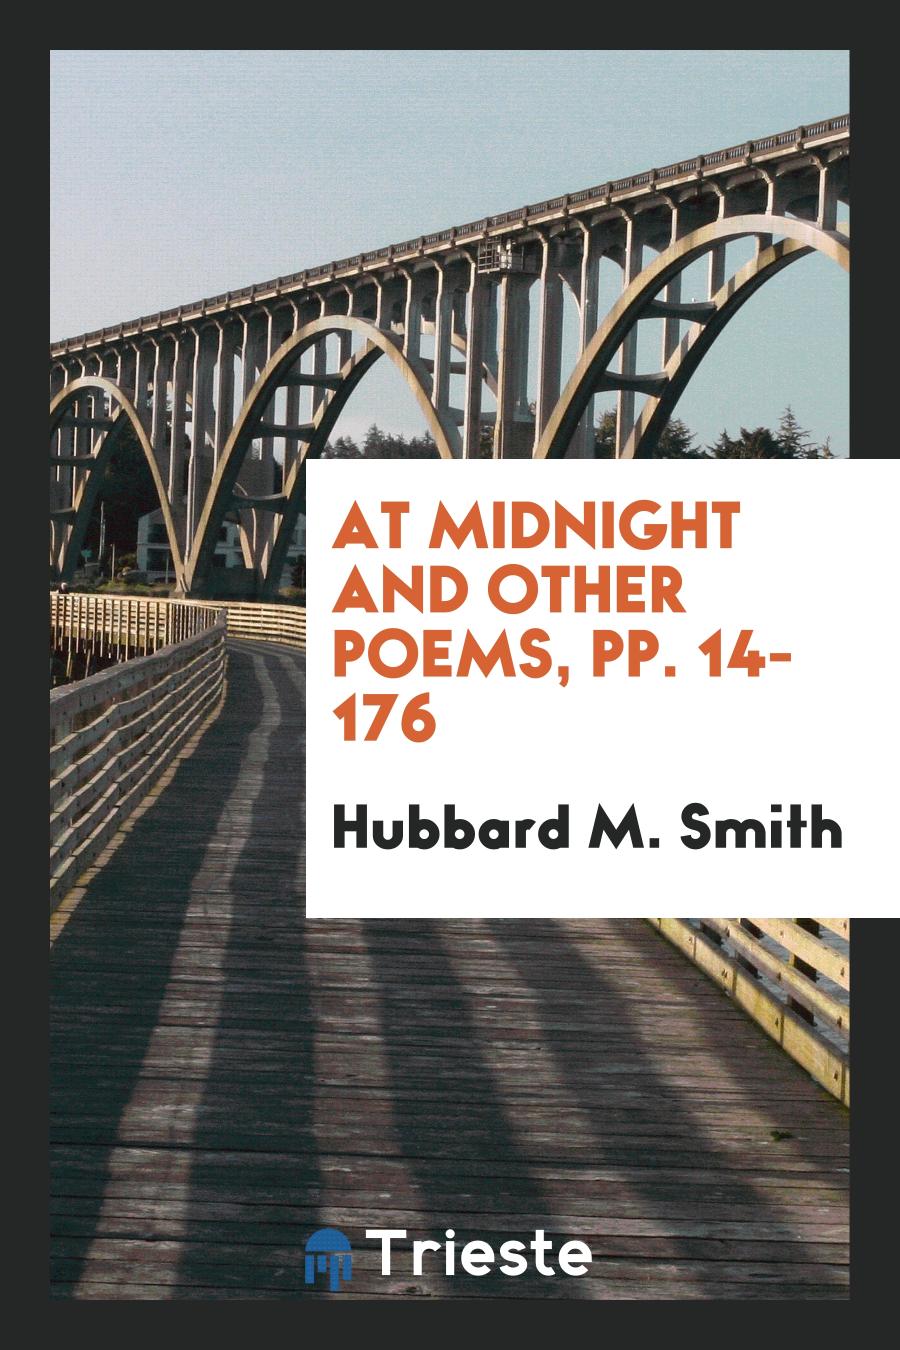 At Midnight and Other Poems, pp. 14-176